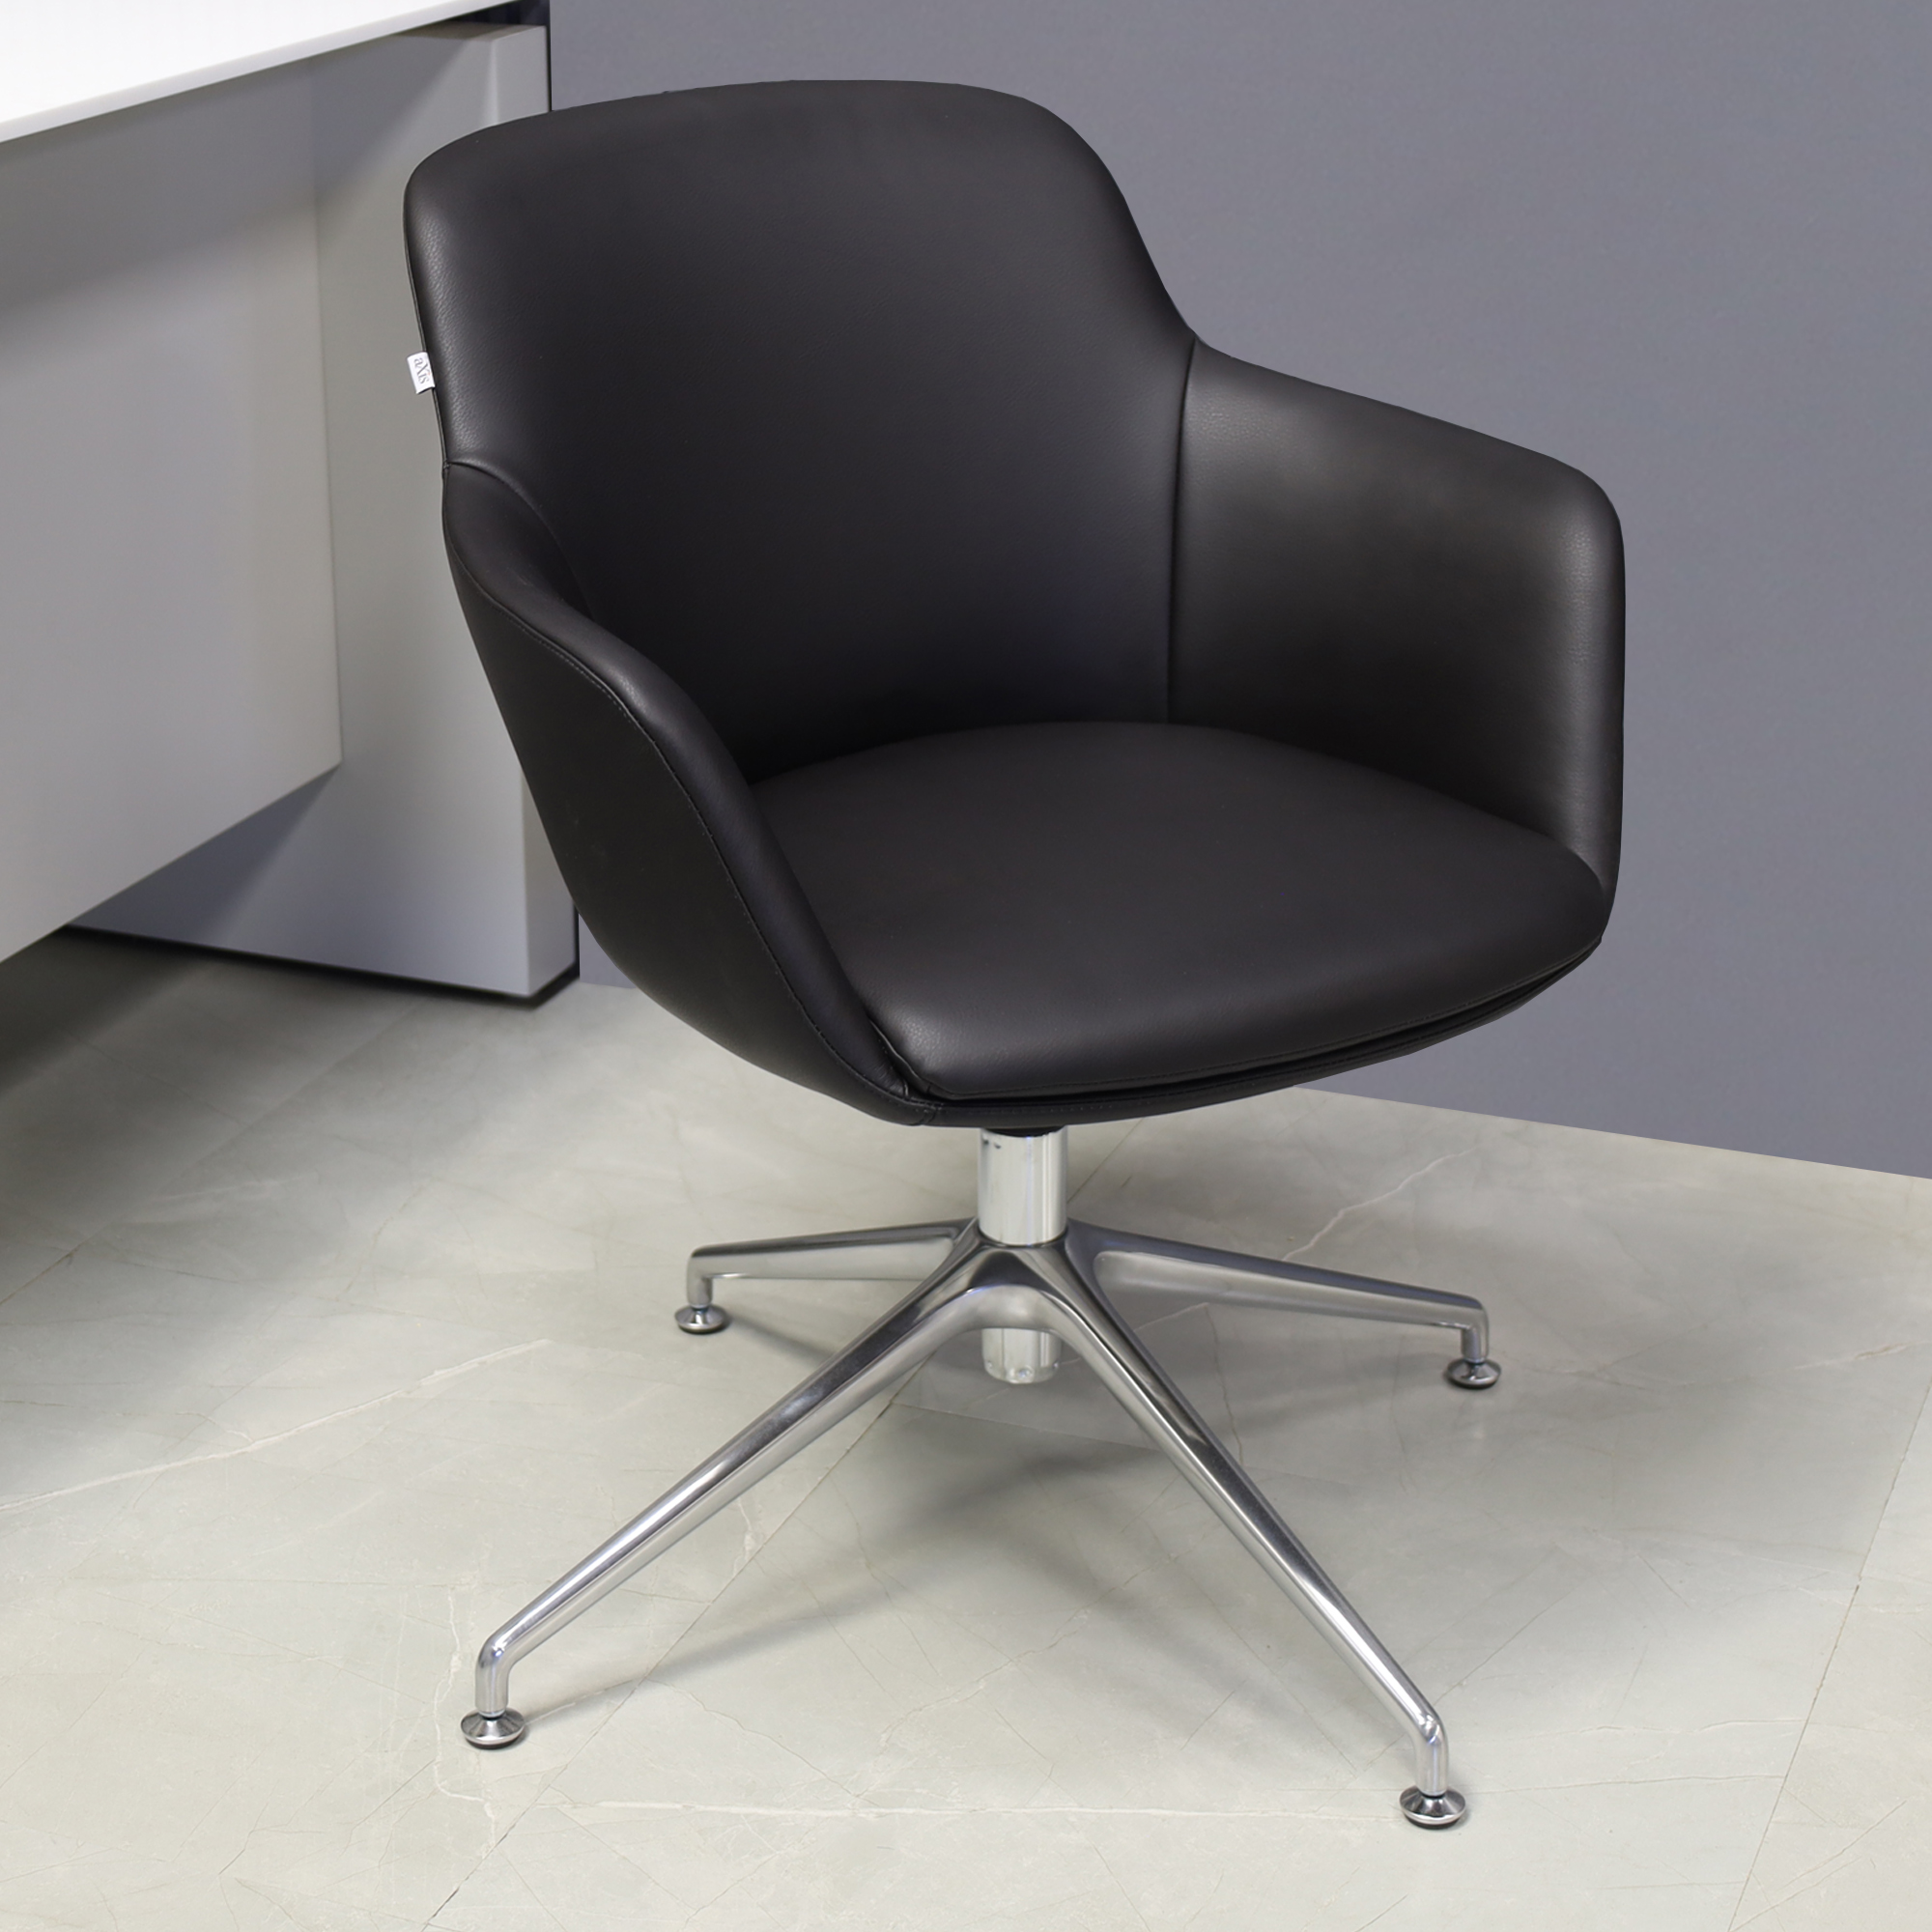 Pavia Guest Chair in black leatherette, shown here.